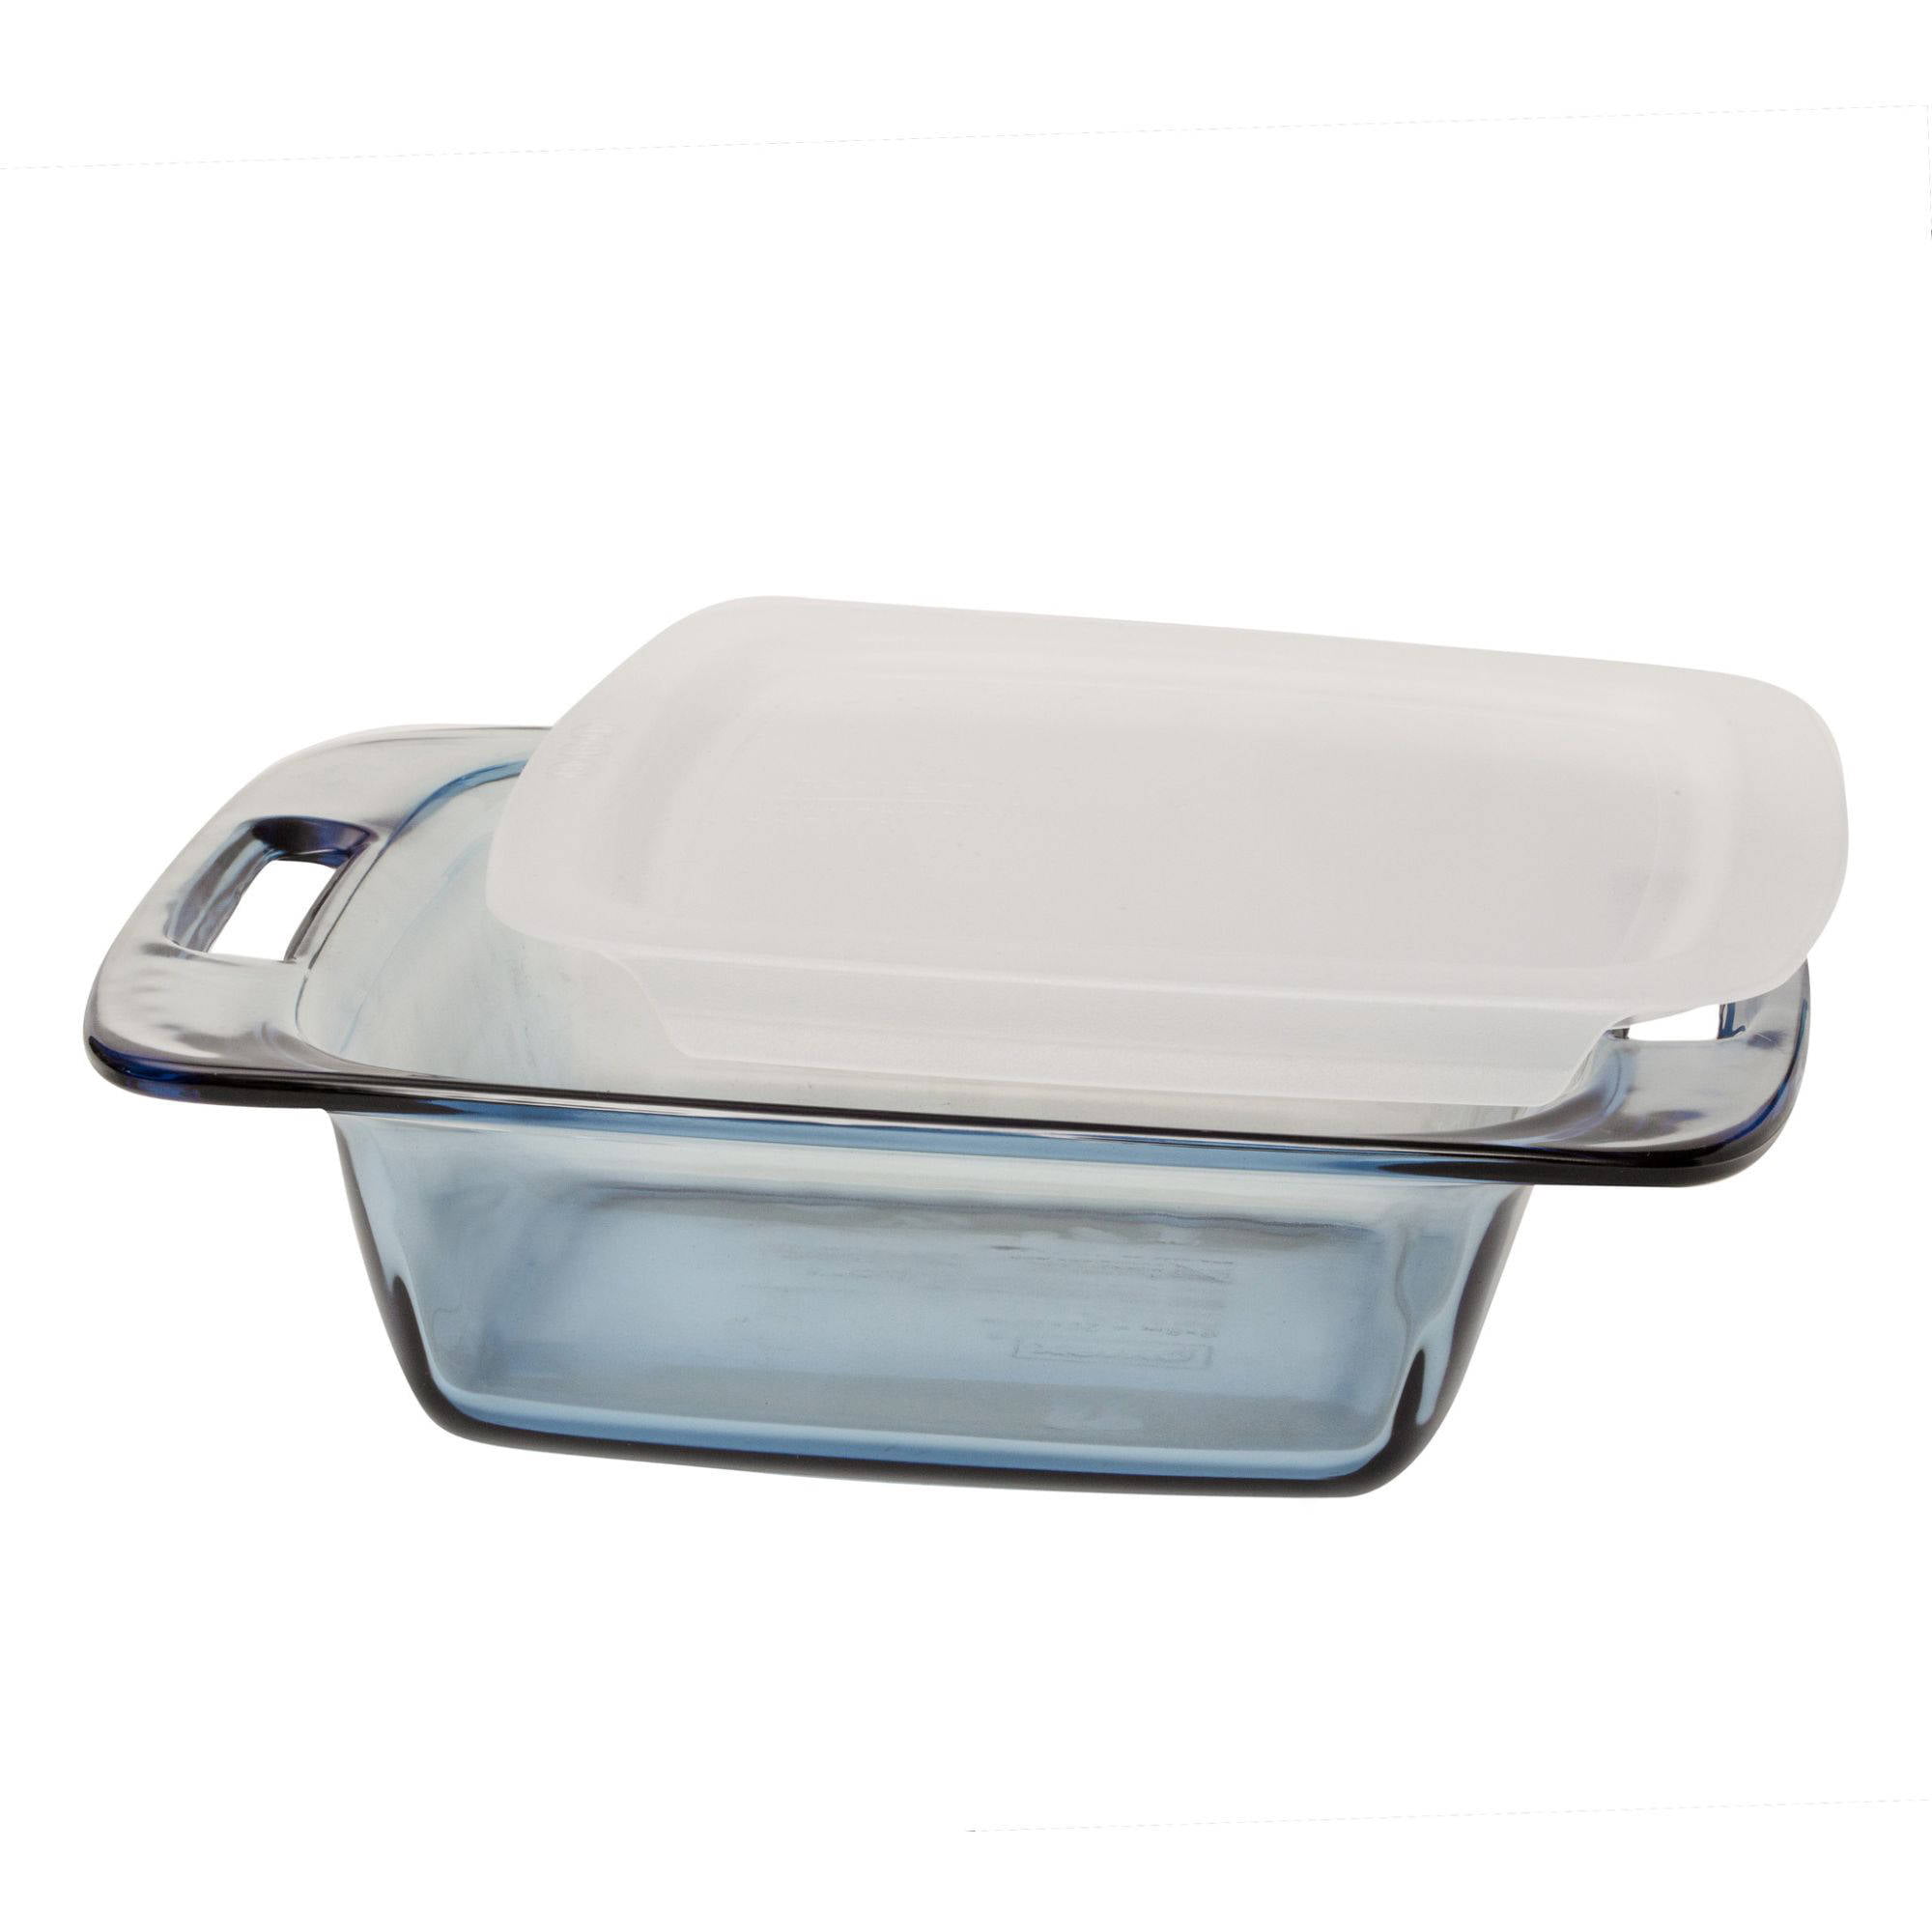 Pyrex 8 Square Baking Dish with Blue Plastic Lid